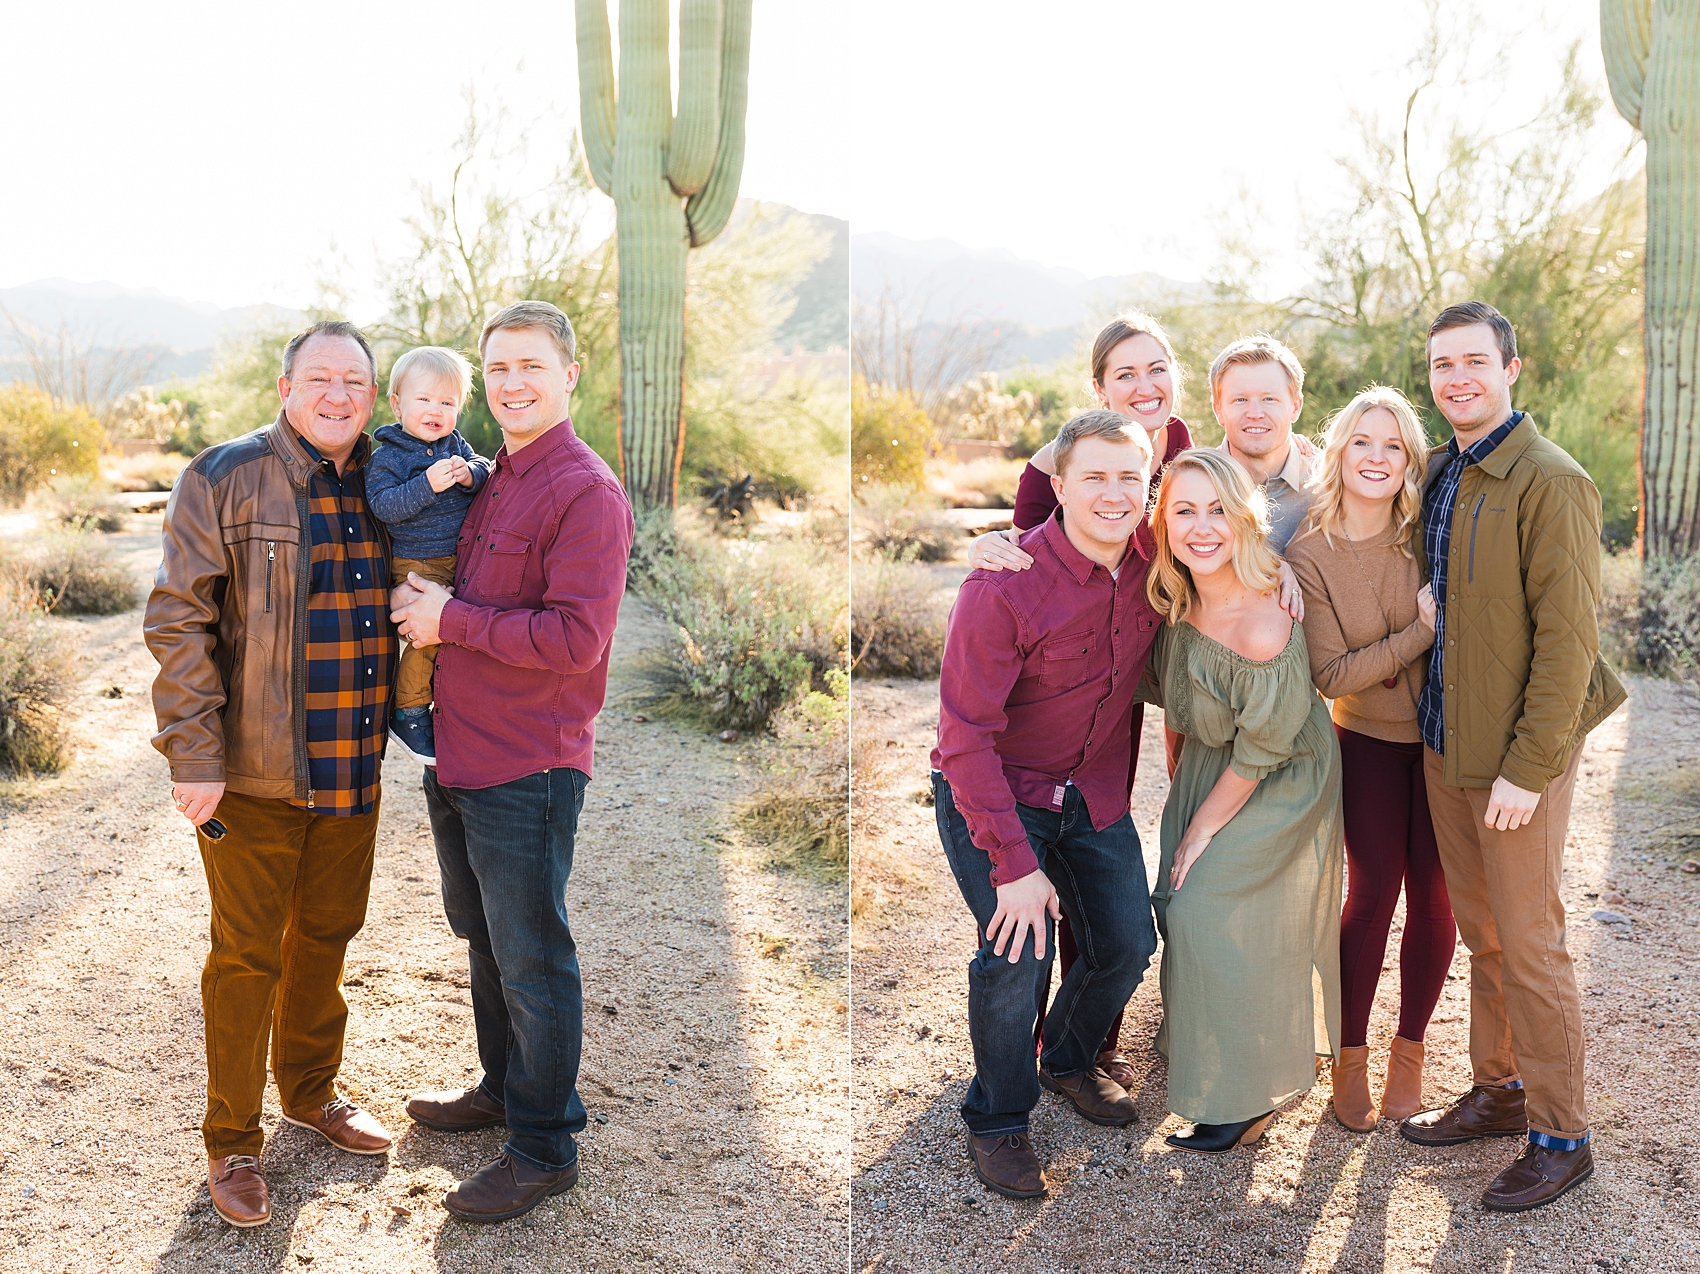 Leah Hope Photography | Scottsdale Phoenix Arizona | Desert Landscape Cactus Mountains Scenery | Sunrise Golden Sunlight | Extended Family Photos | Family Pictures | What to Wear | Family Poses | Coordinating Outfits